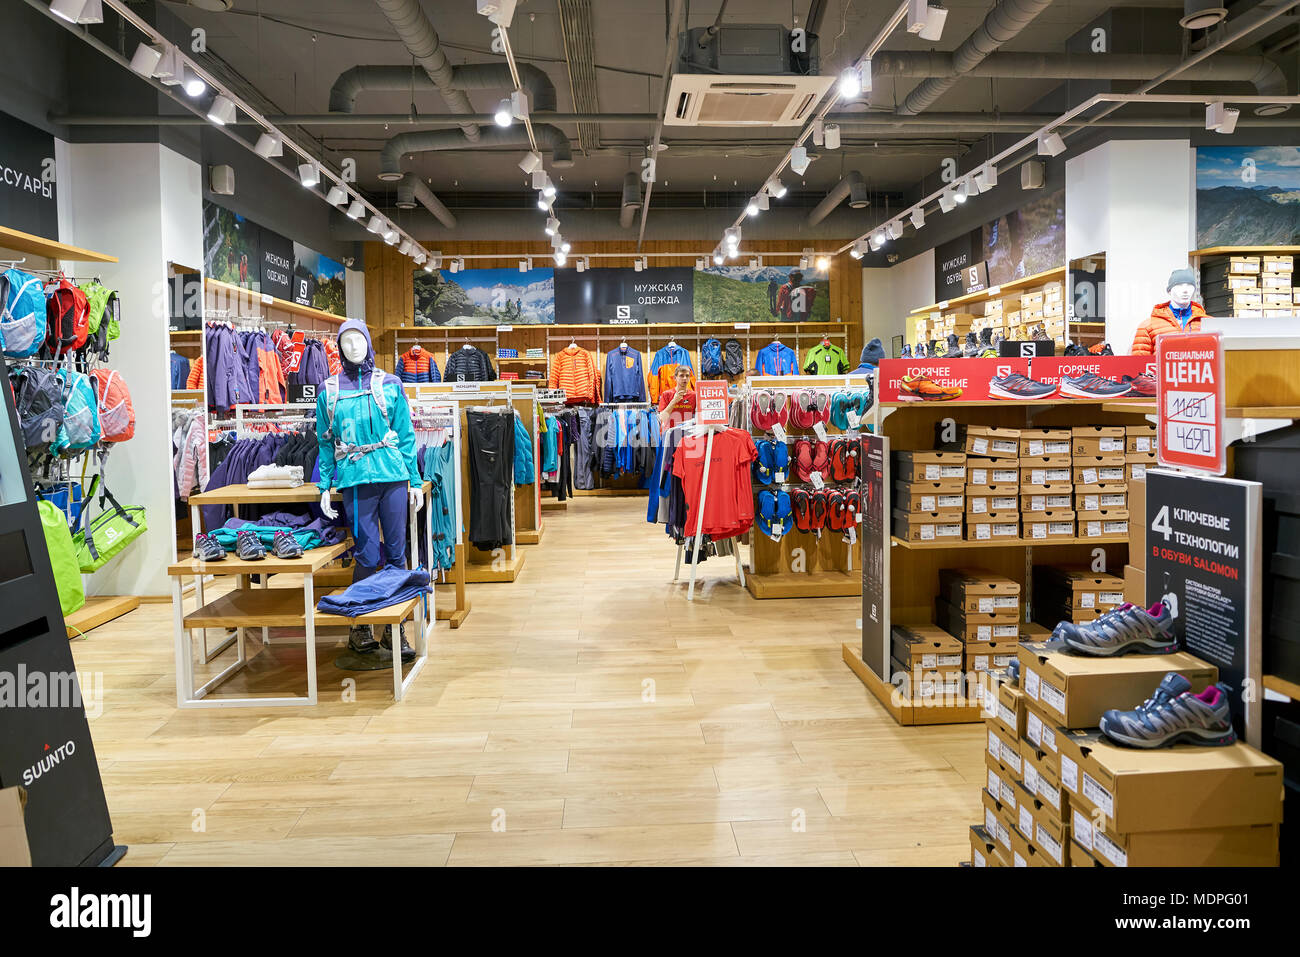 SAINT PETERSBURG, RUSSIA - CIRCA OCTOBER, 2017: inside Salomon store in  Saint Petersburg. The Salomon Group is a sports equipment manufacturing  compan Stock Photo - Alamy